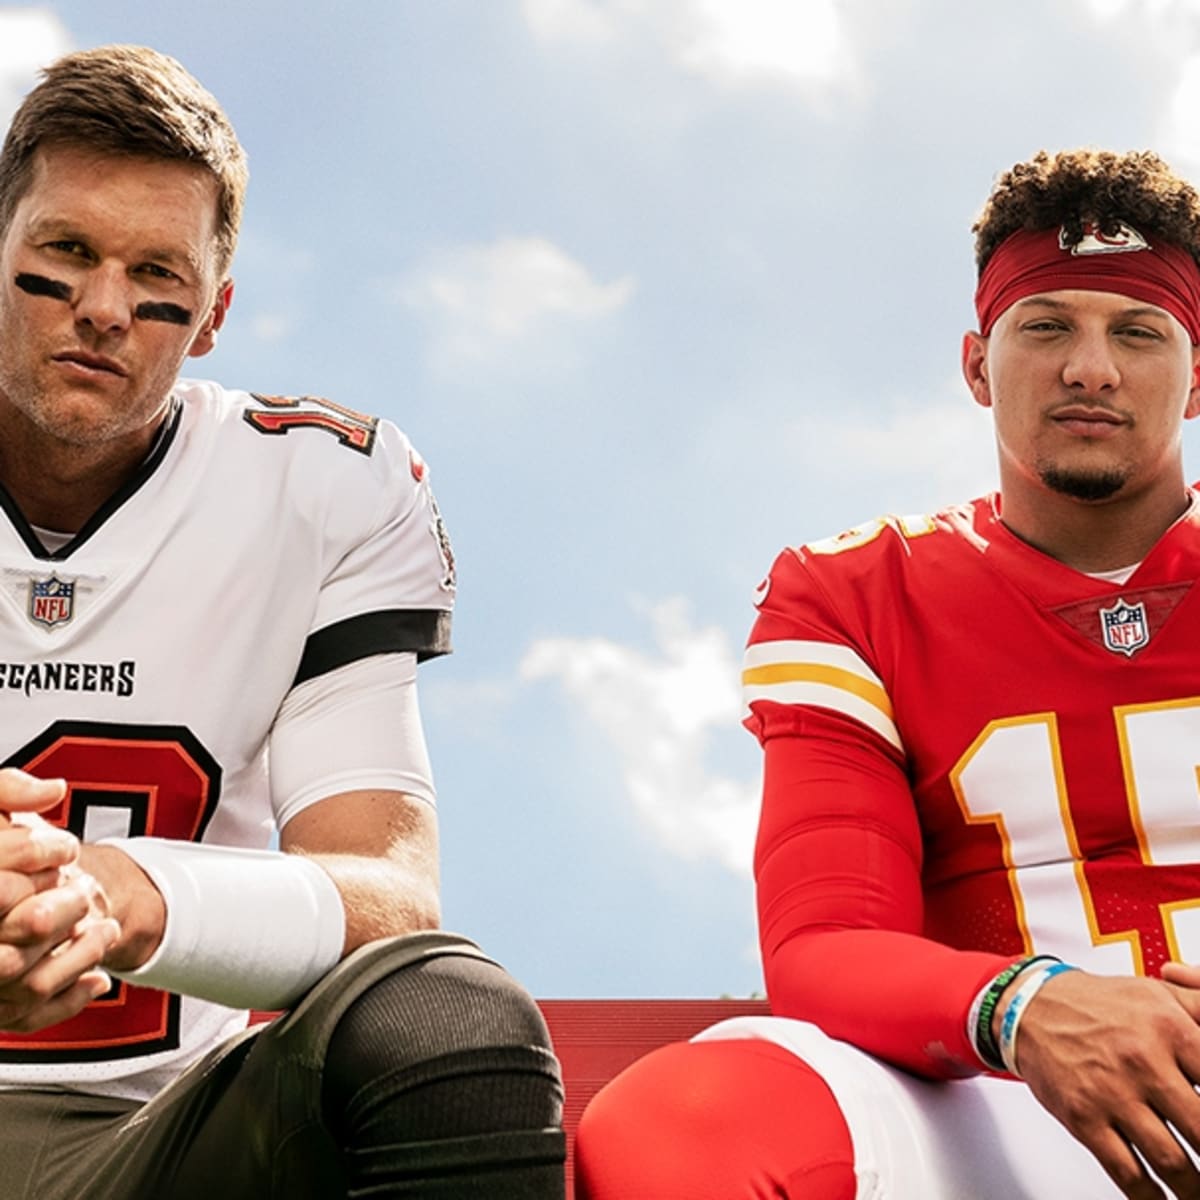 Madden 22 cover: Tom Brady, Patrick Mahomes featured in game's new release  - Sports Illustrated